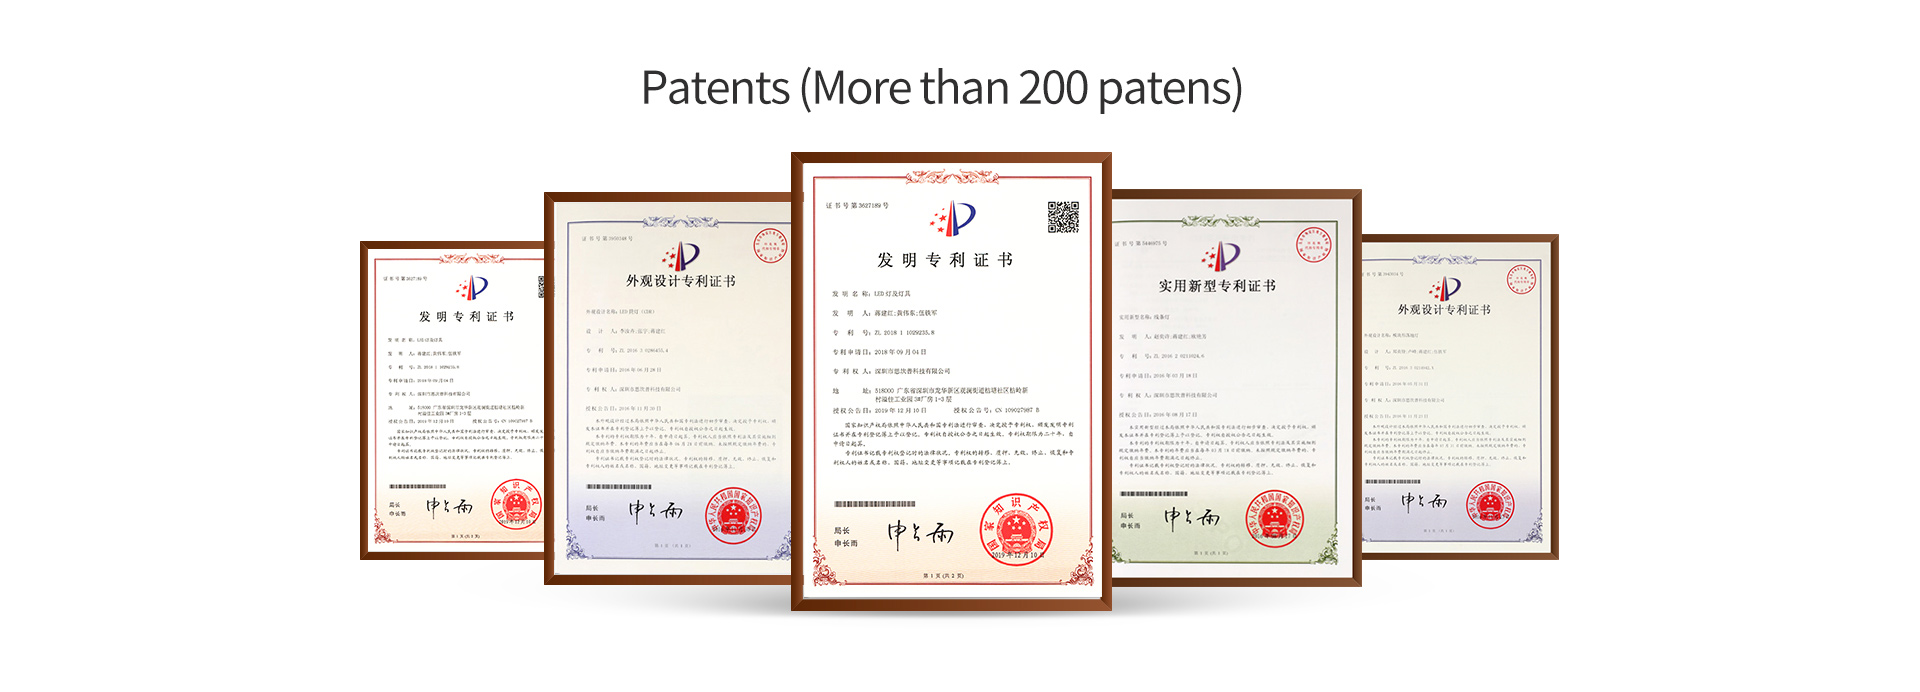 Patents (More than 200 patens)